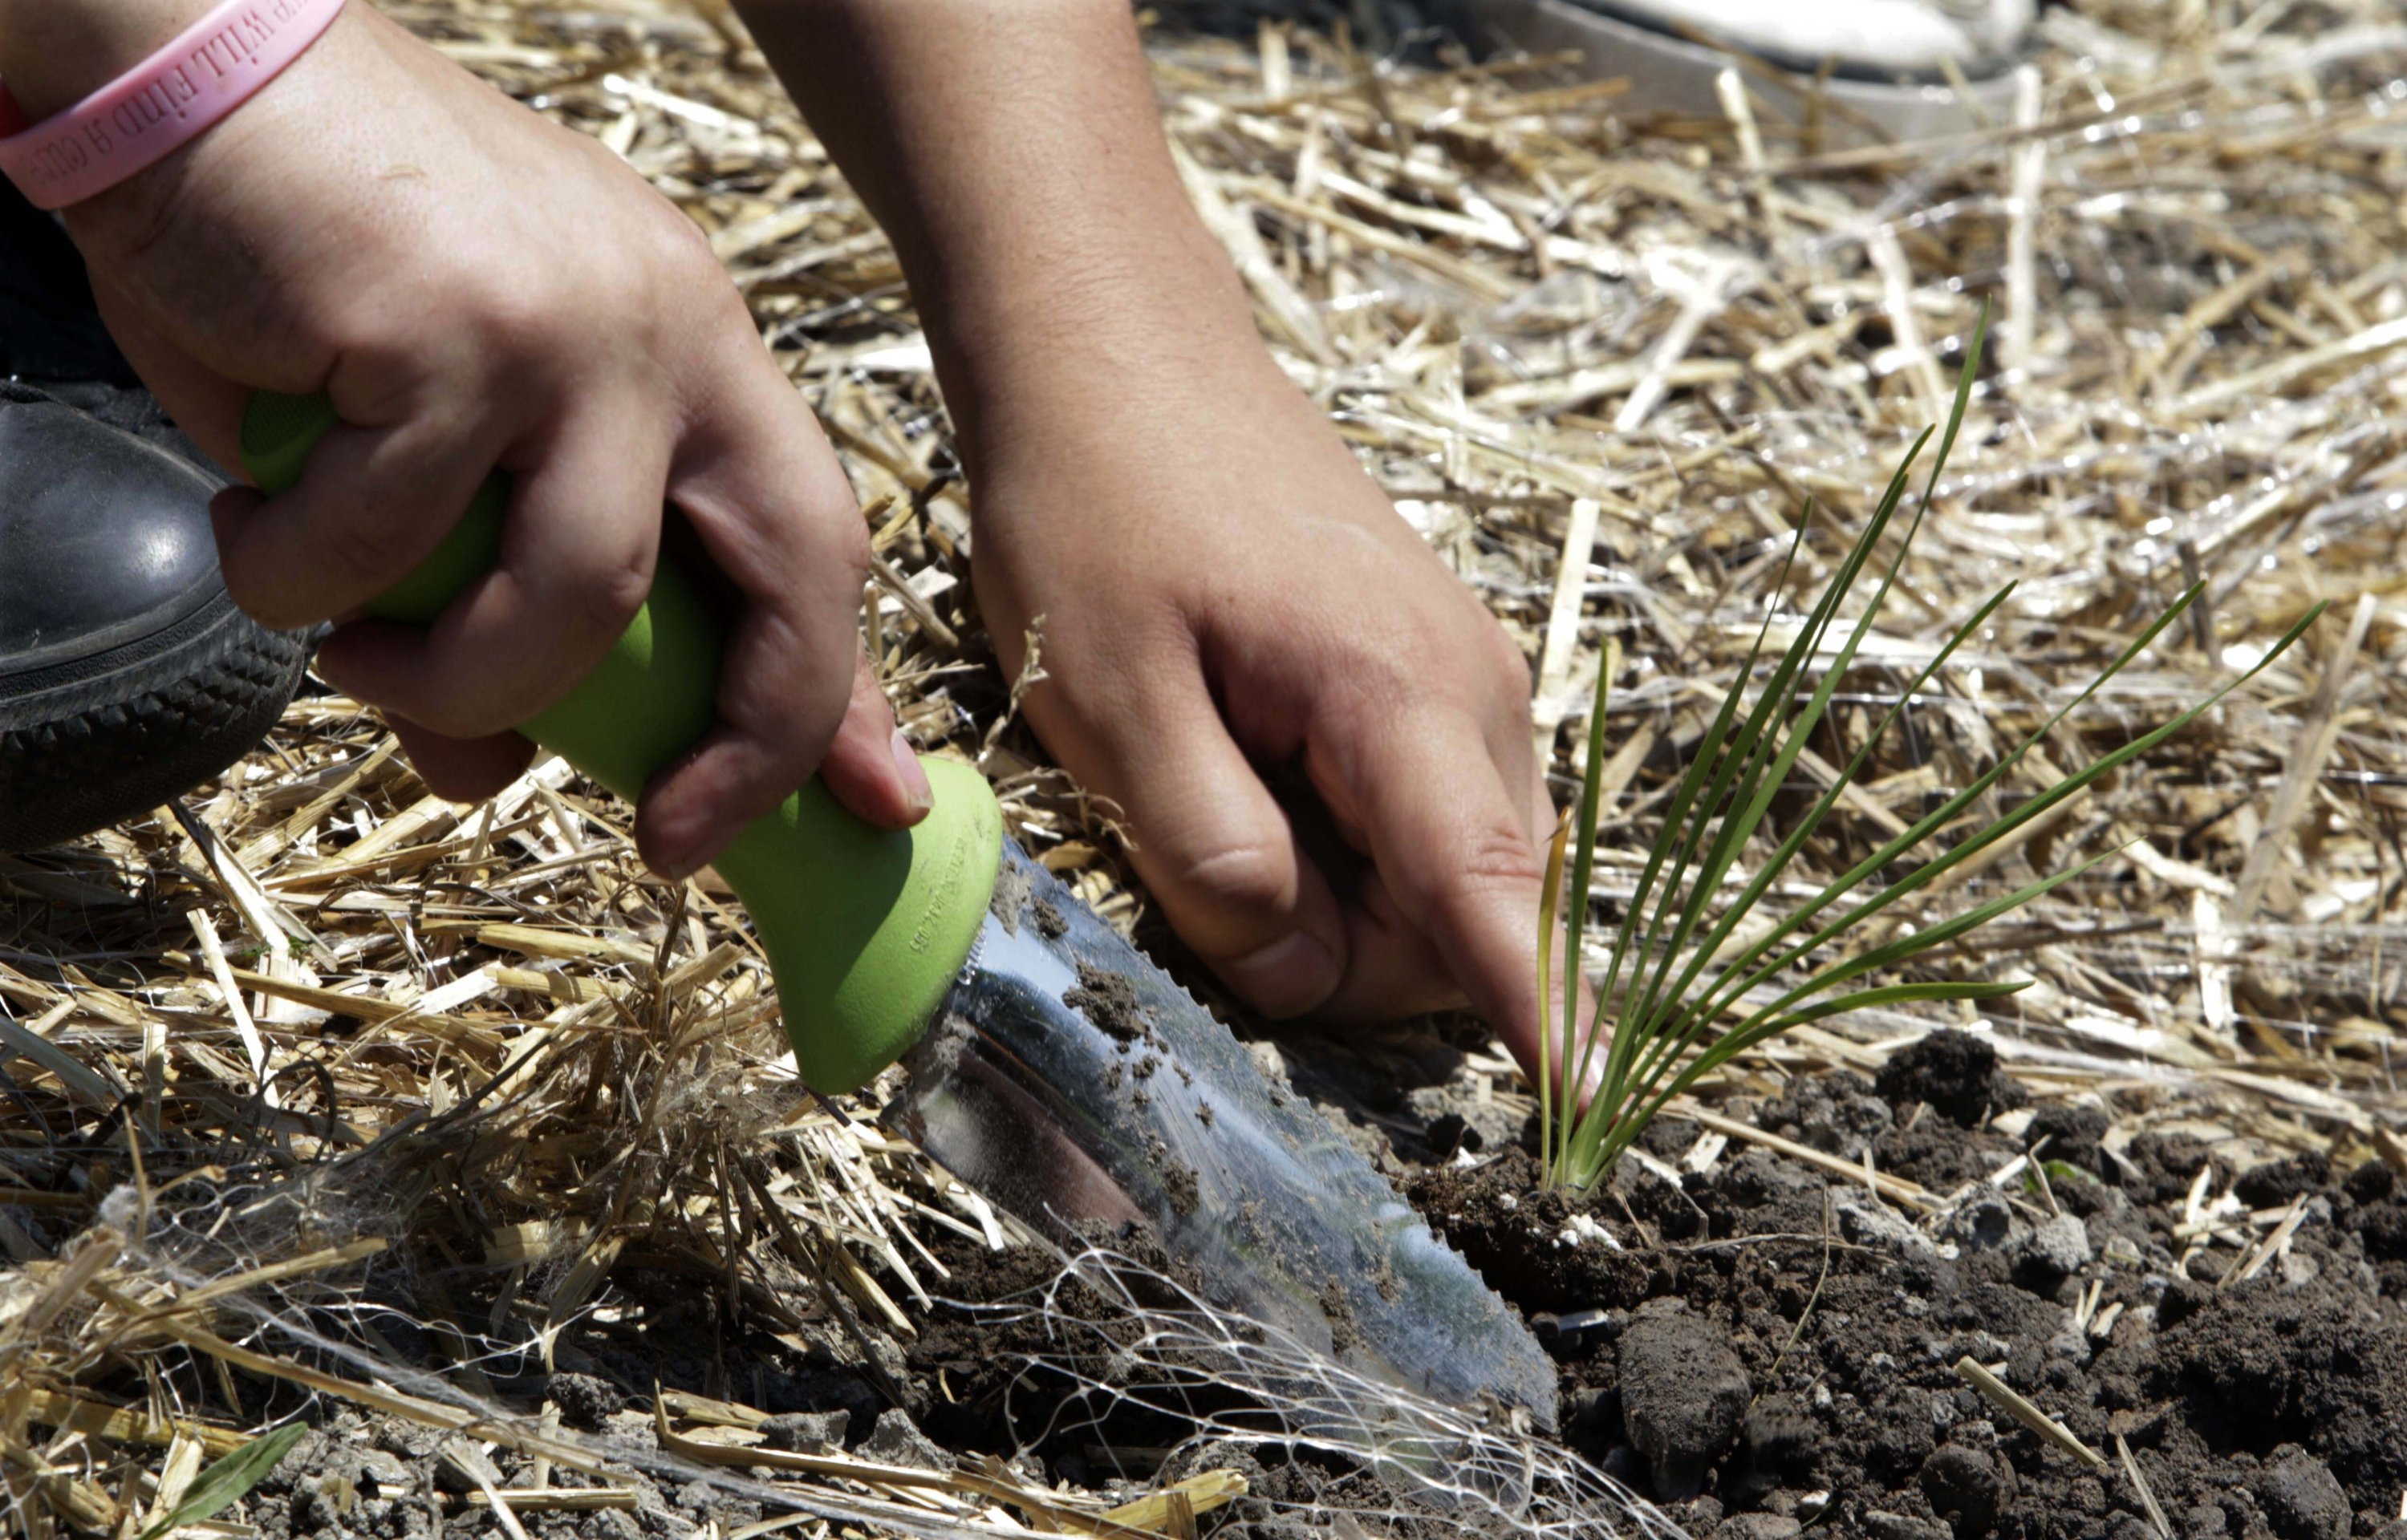 A man puts an onion plant in the ground during a gardening exercise with the American Indian Center in Chicago, Illinois, July 10, 2014 (Photo by: Associated Press)